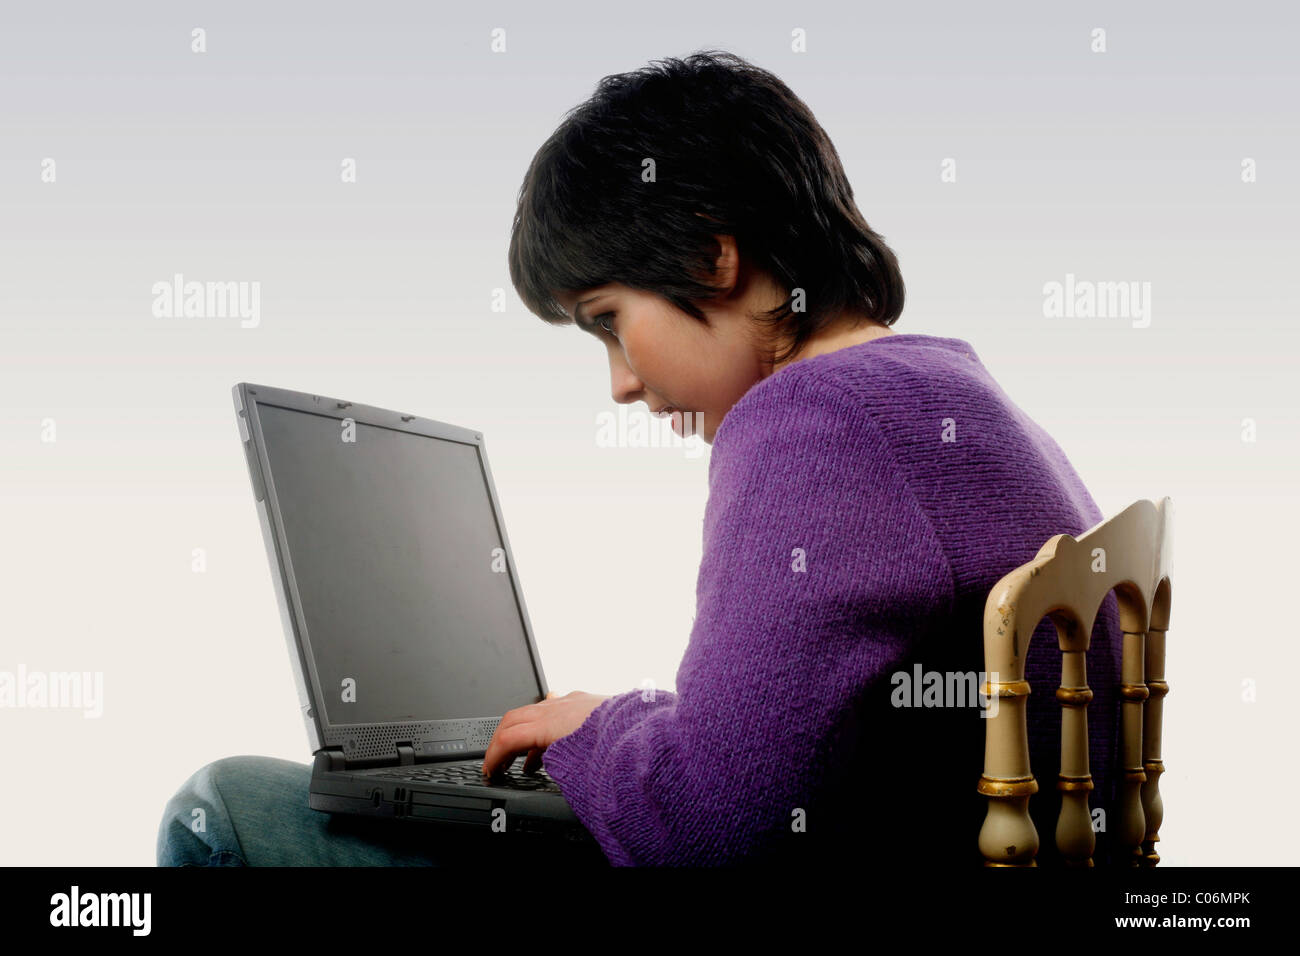 Latin girl with a laptop Stock Photo